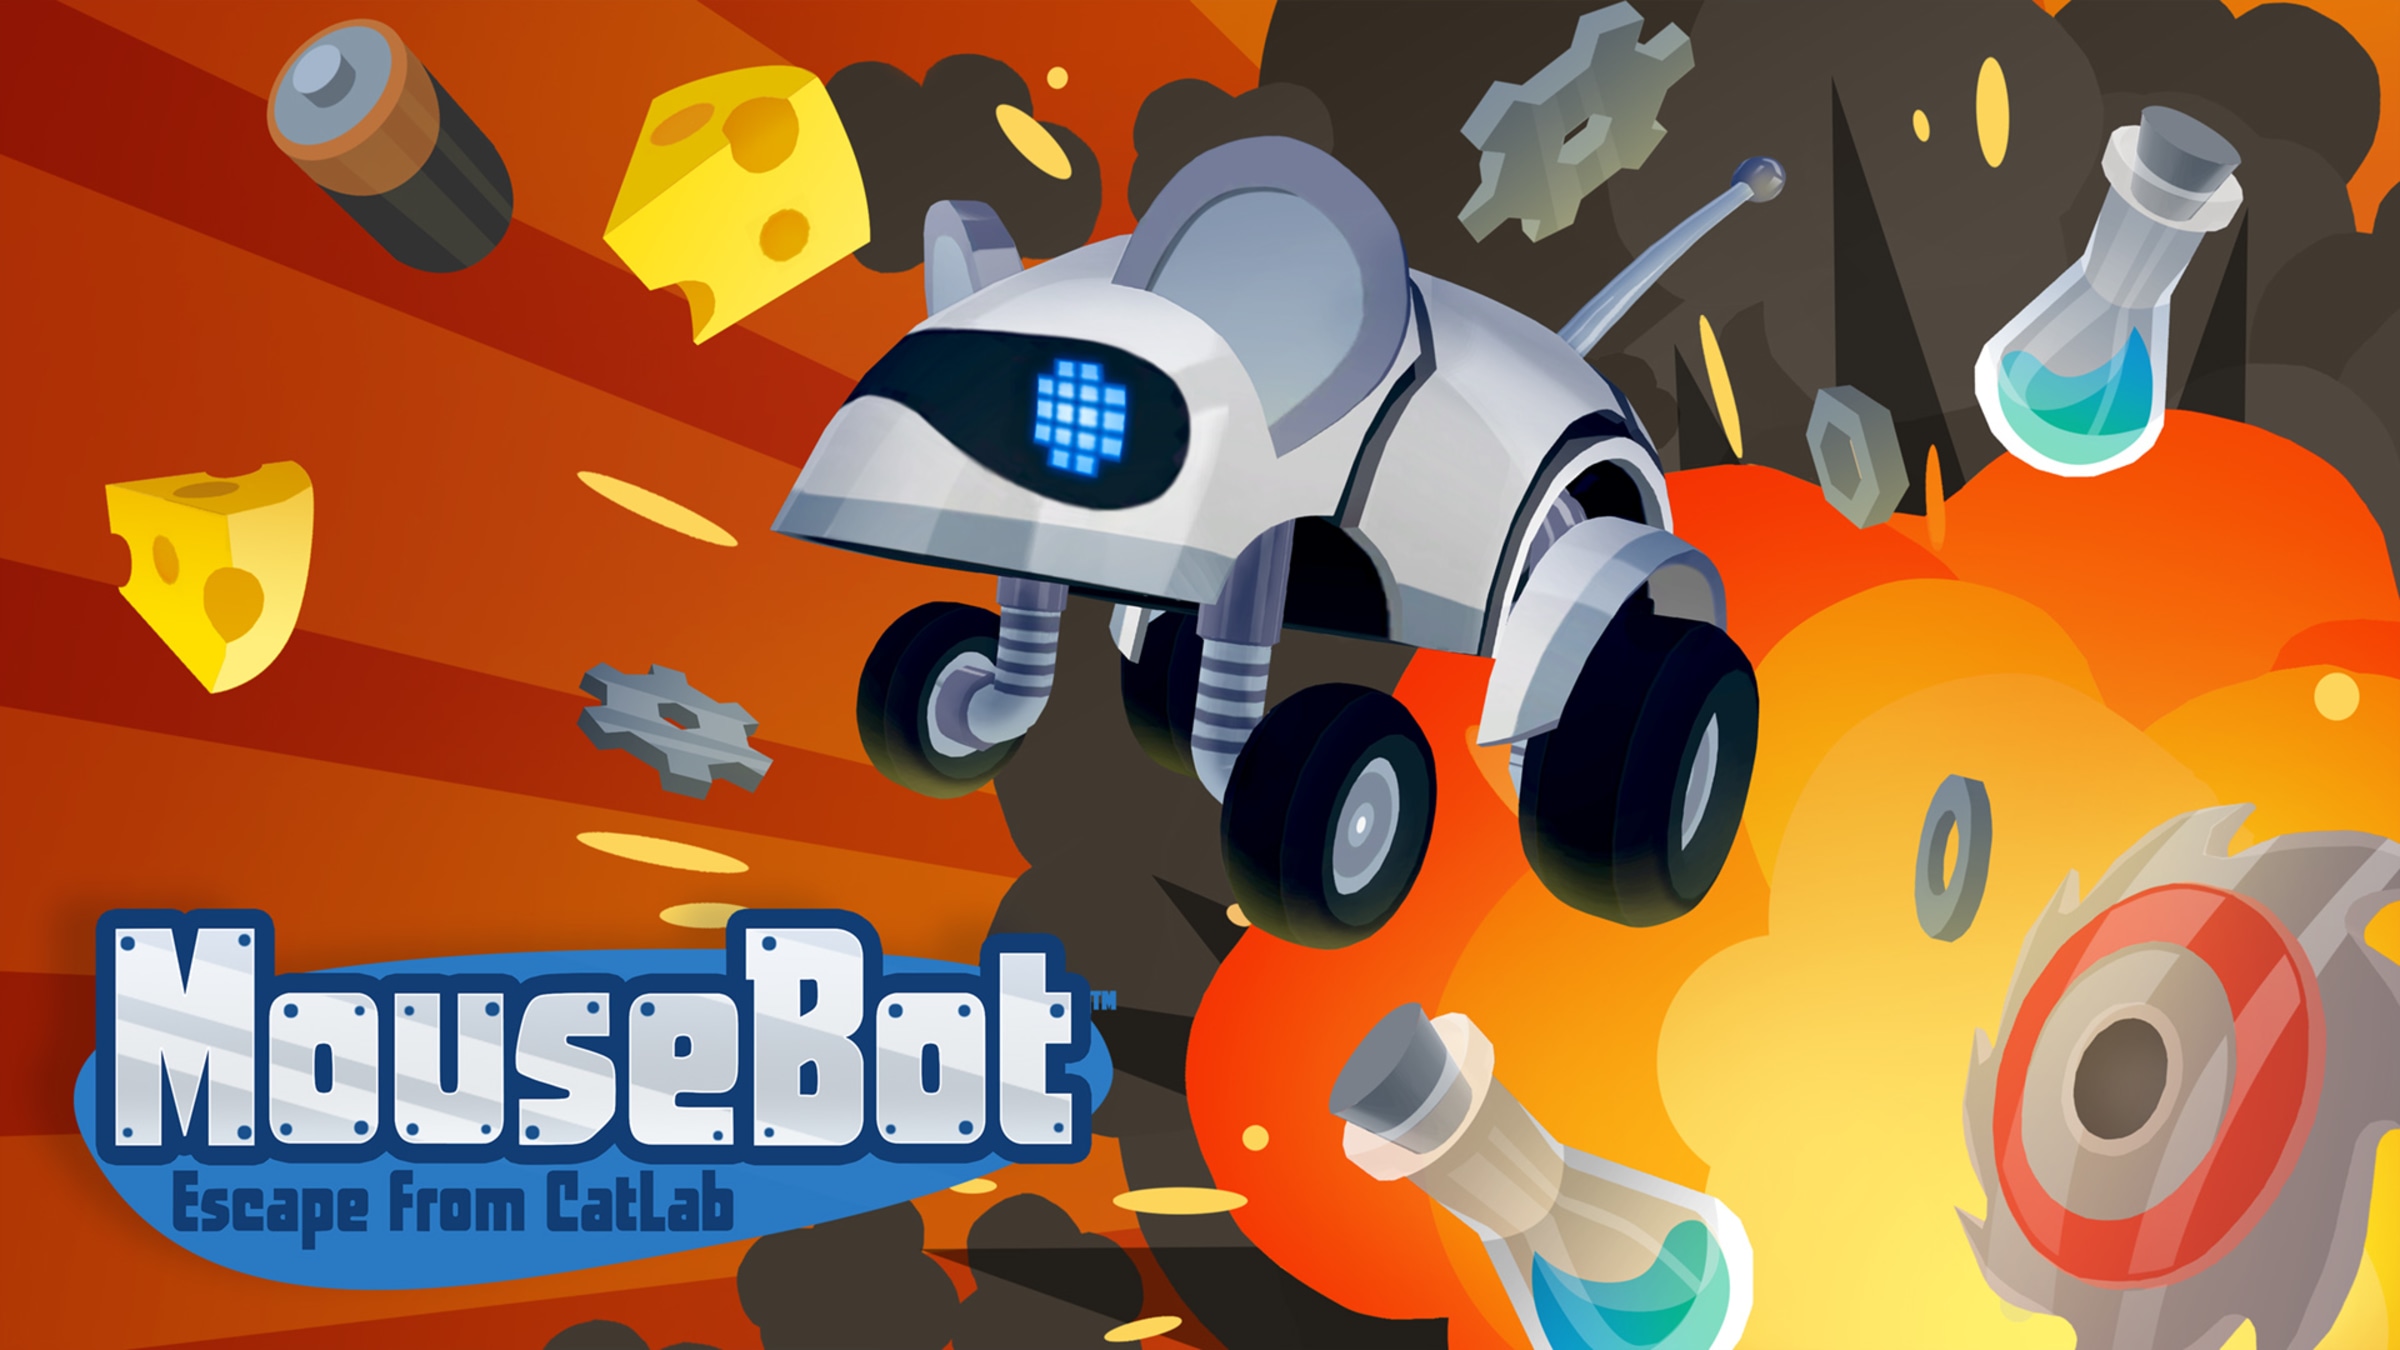 Mousebot: Escape From Catlab For Nintendo Switch - Nintendo Official Site